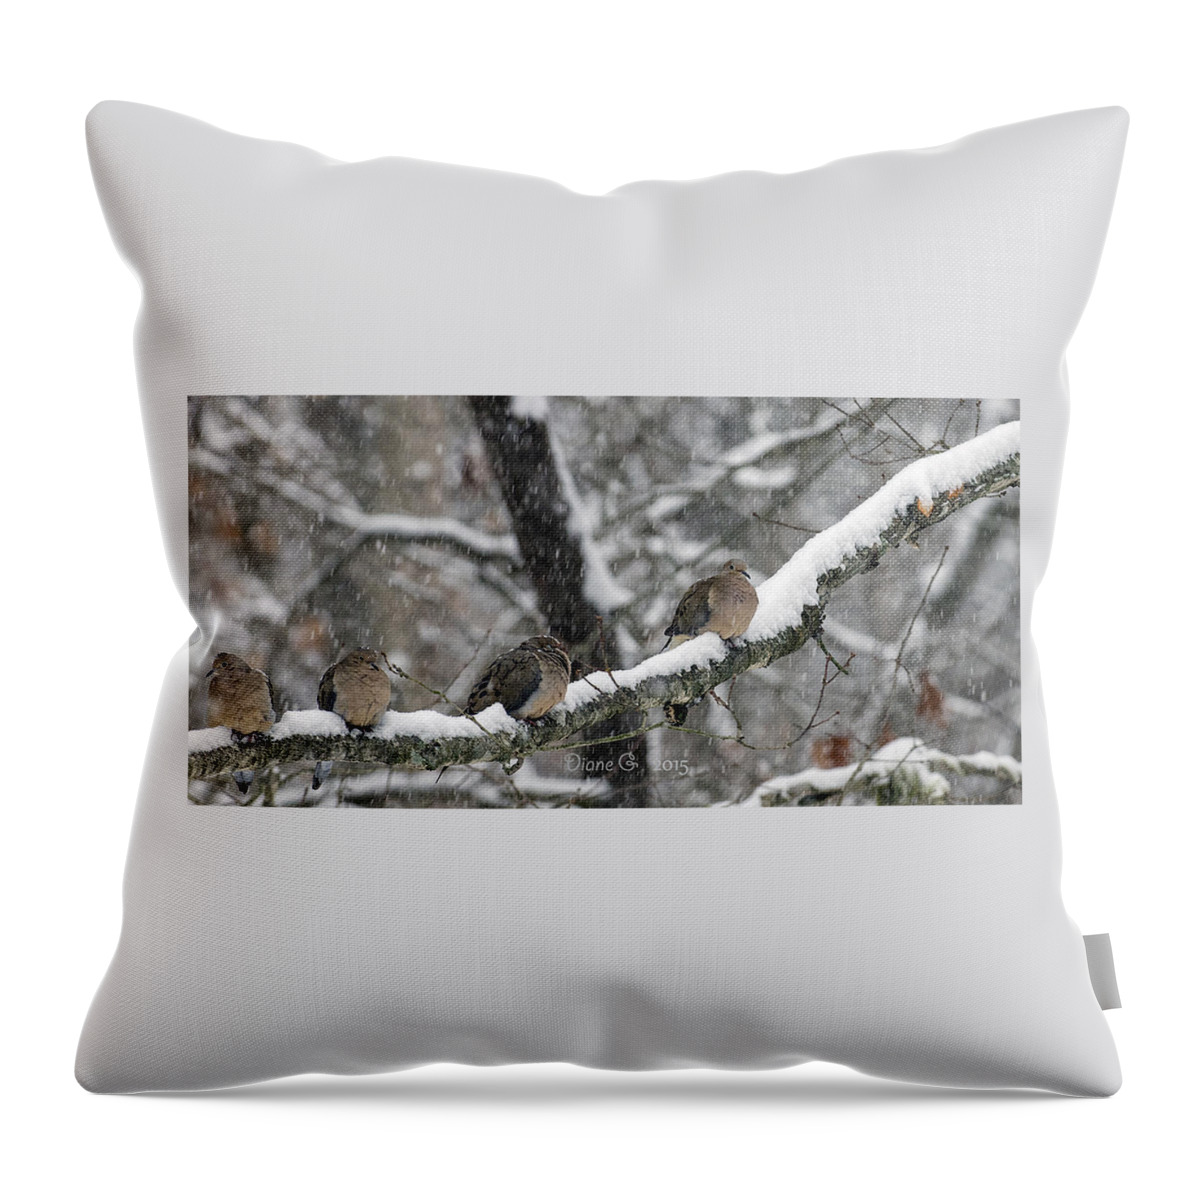 Winter Doves Throw Pillow featuring the photograph Winter Doves by Diane Giurco